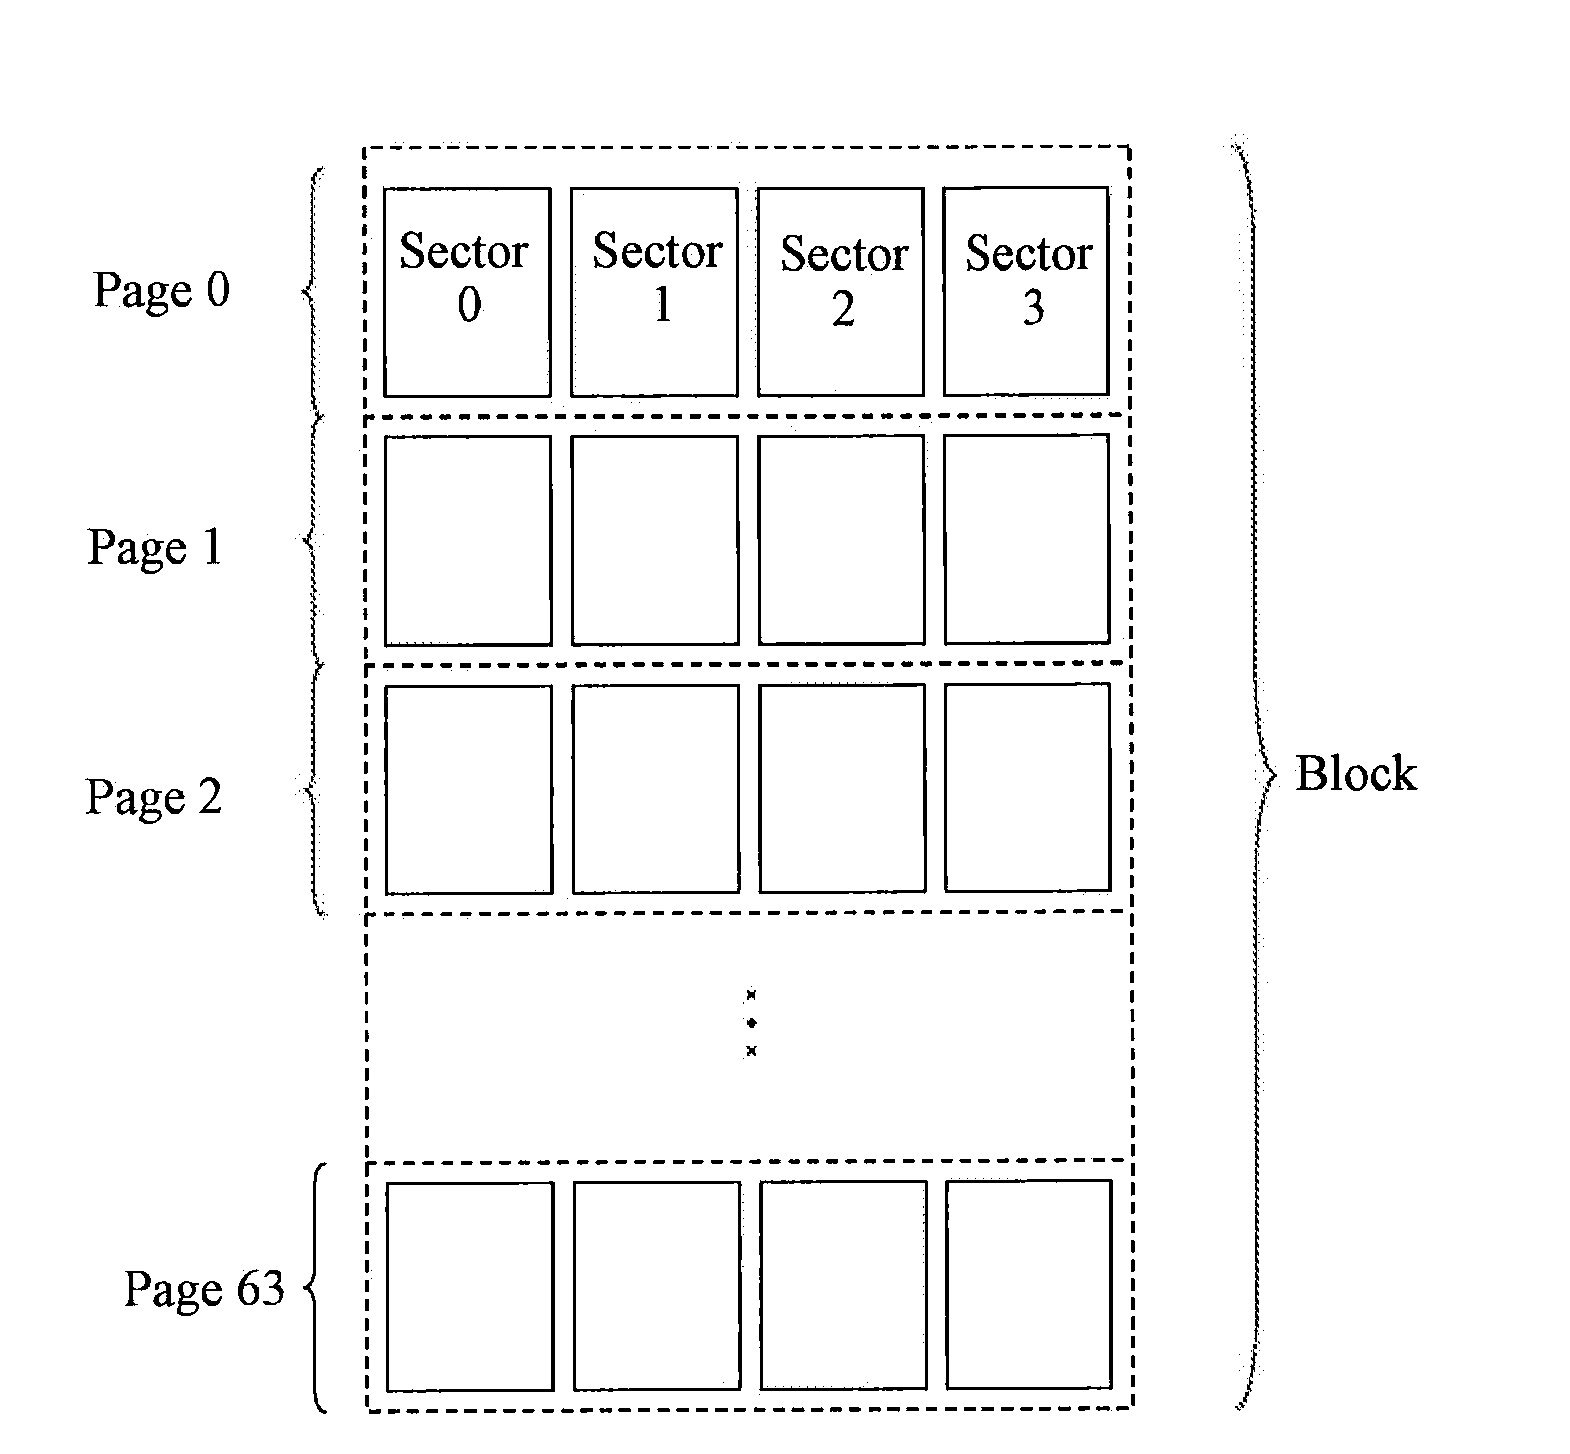 Self-adaptive control method for logical strips based on multi-channel solid-state non-volatile storage device